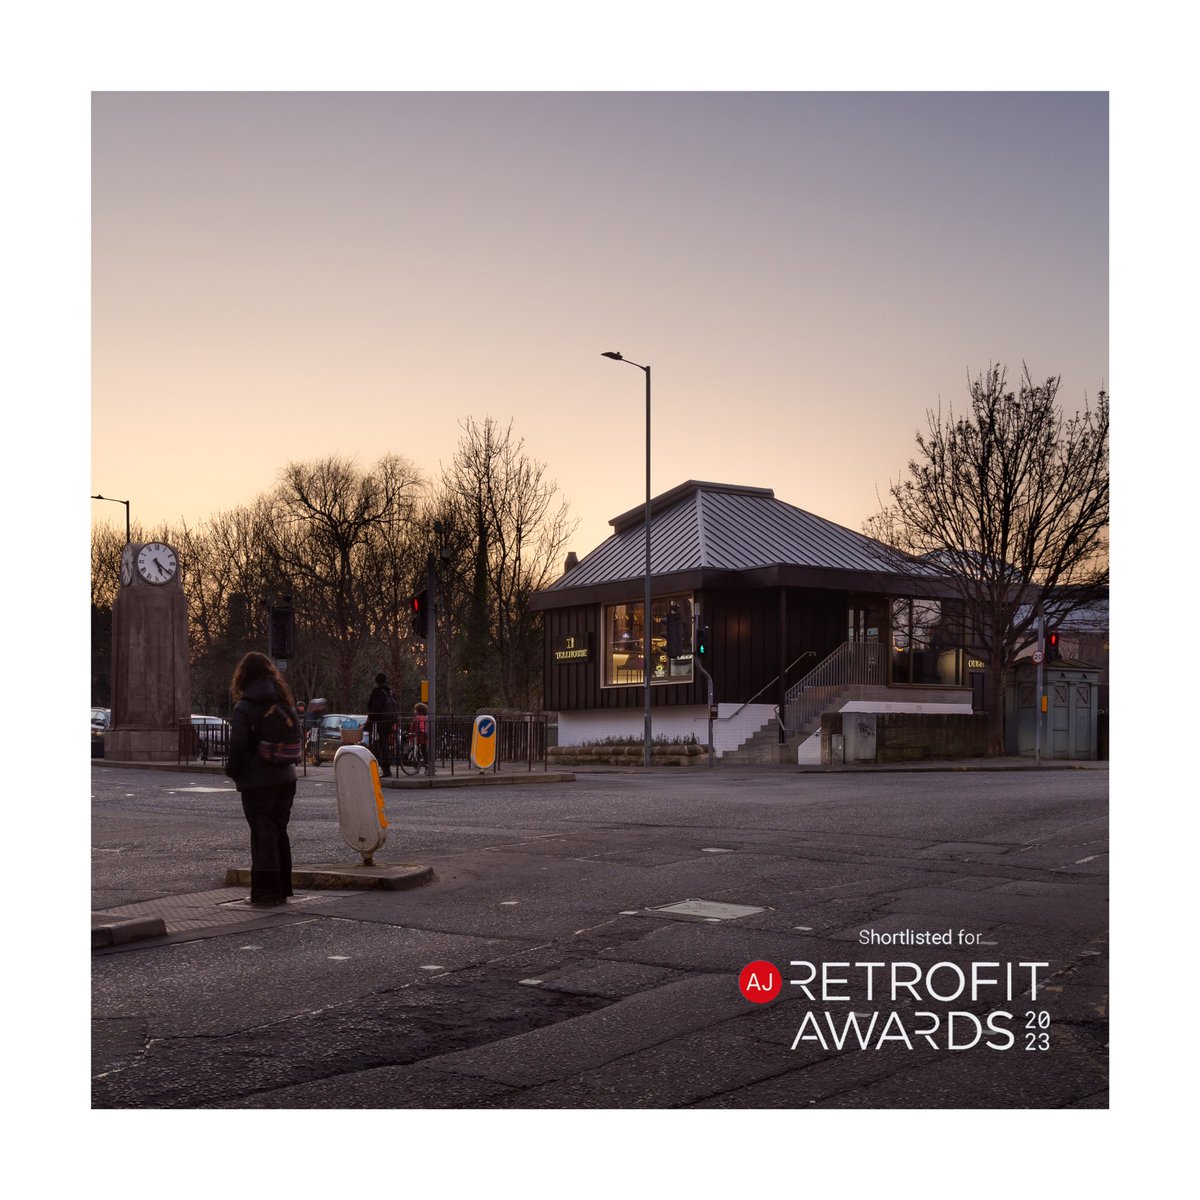 AJ Retrofit Awards.

We’re delighted to announce our Toll House restaurant project has been shortlisted as a finalist in the AJ Retrofit Awards 2023.
@ArchitectsJrnal @DineEdinburgh #ajretrofitawards #finalist #awards #leisure #retail #retrofit #reuse #fraserlivingstone #FLA